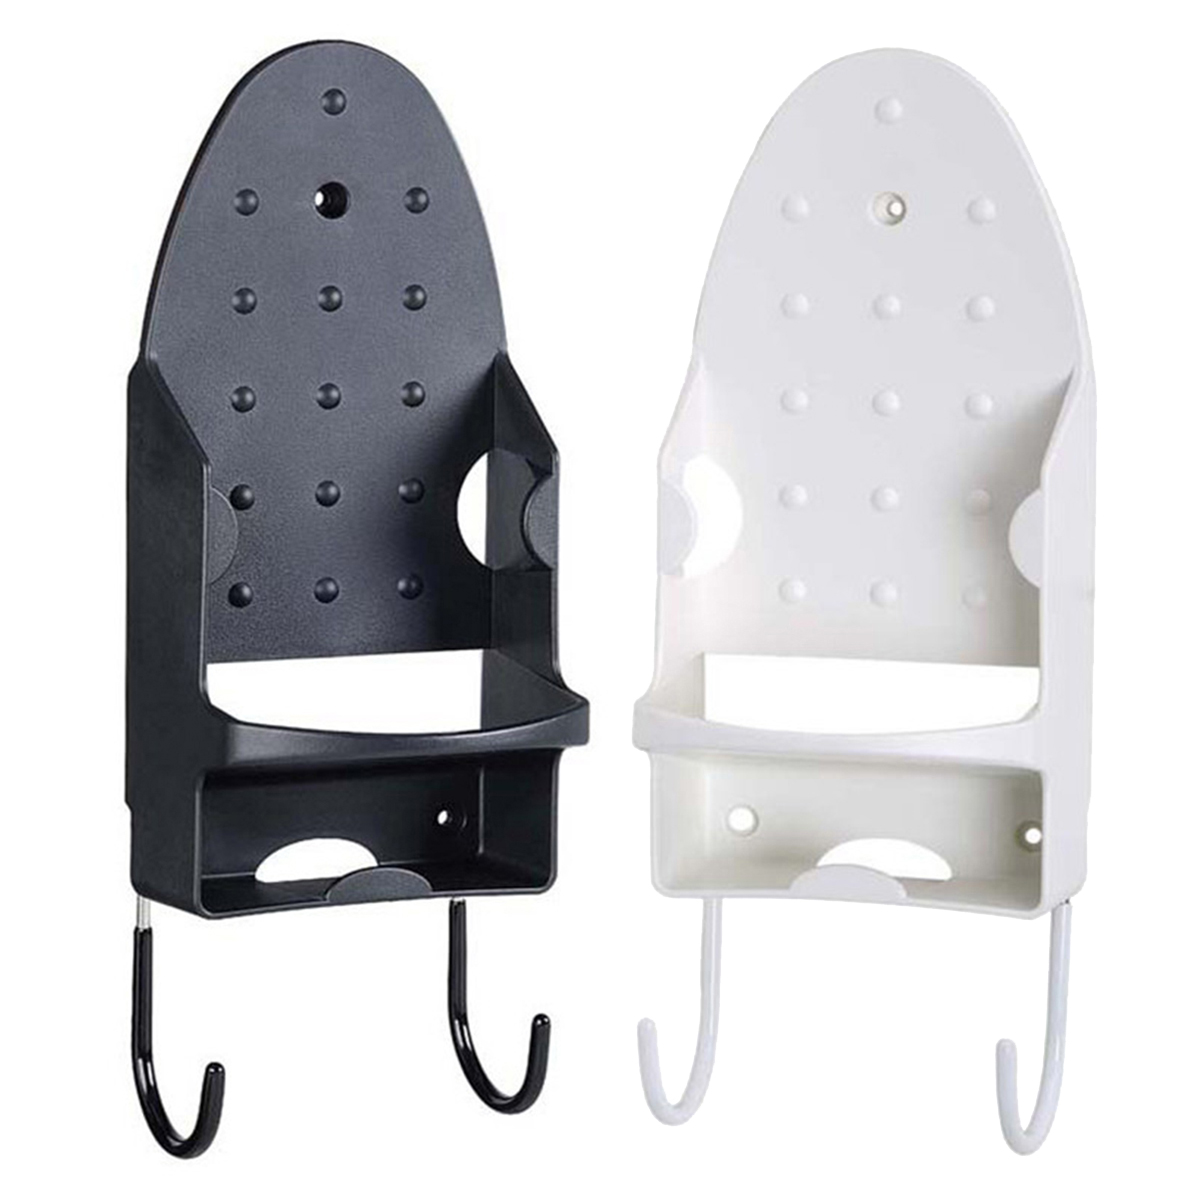 Hotel-Home-Laundry-Iron-Board-Holder-Wall-Mount-Storage-Ironing-Board-Hook-Hanger-1237520